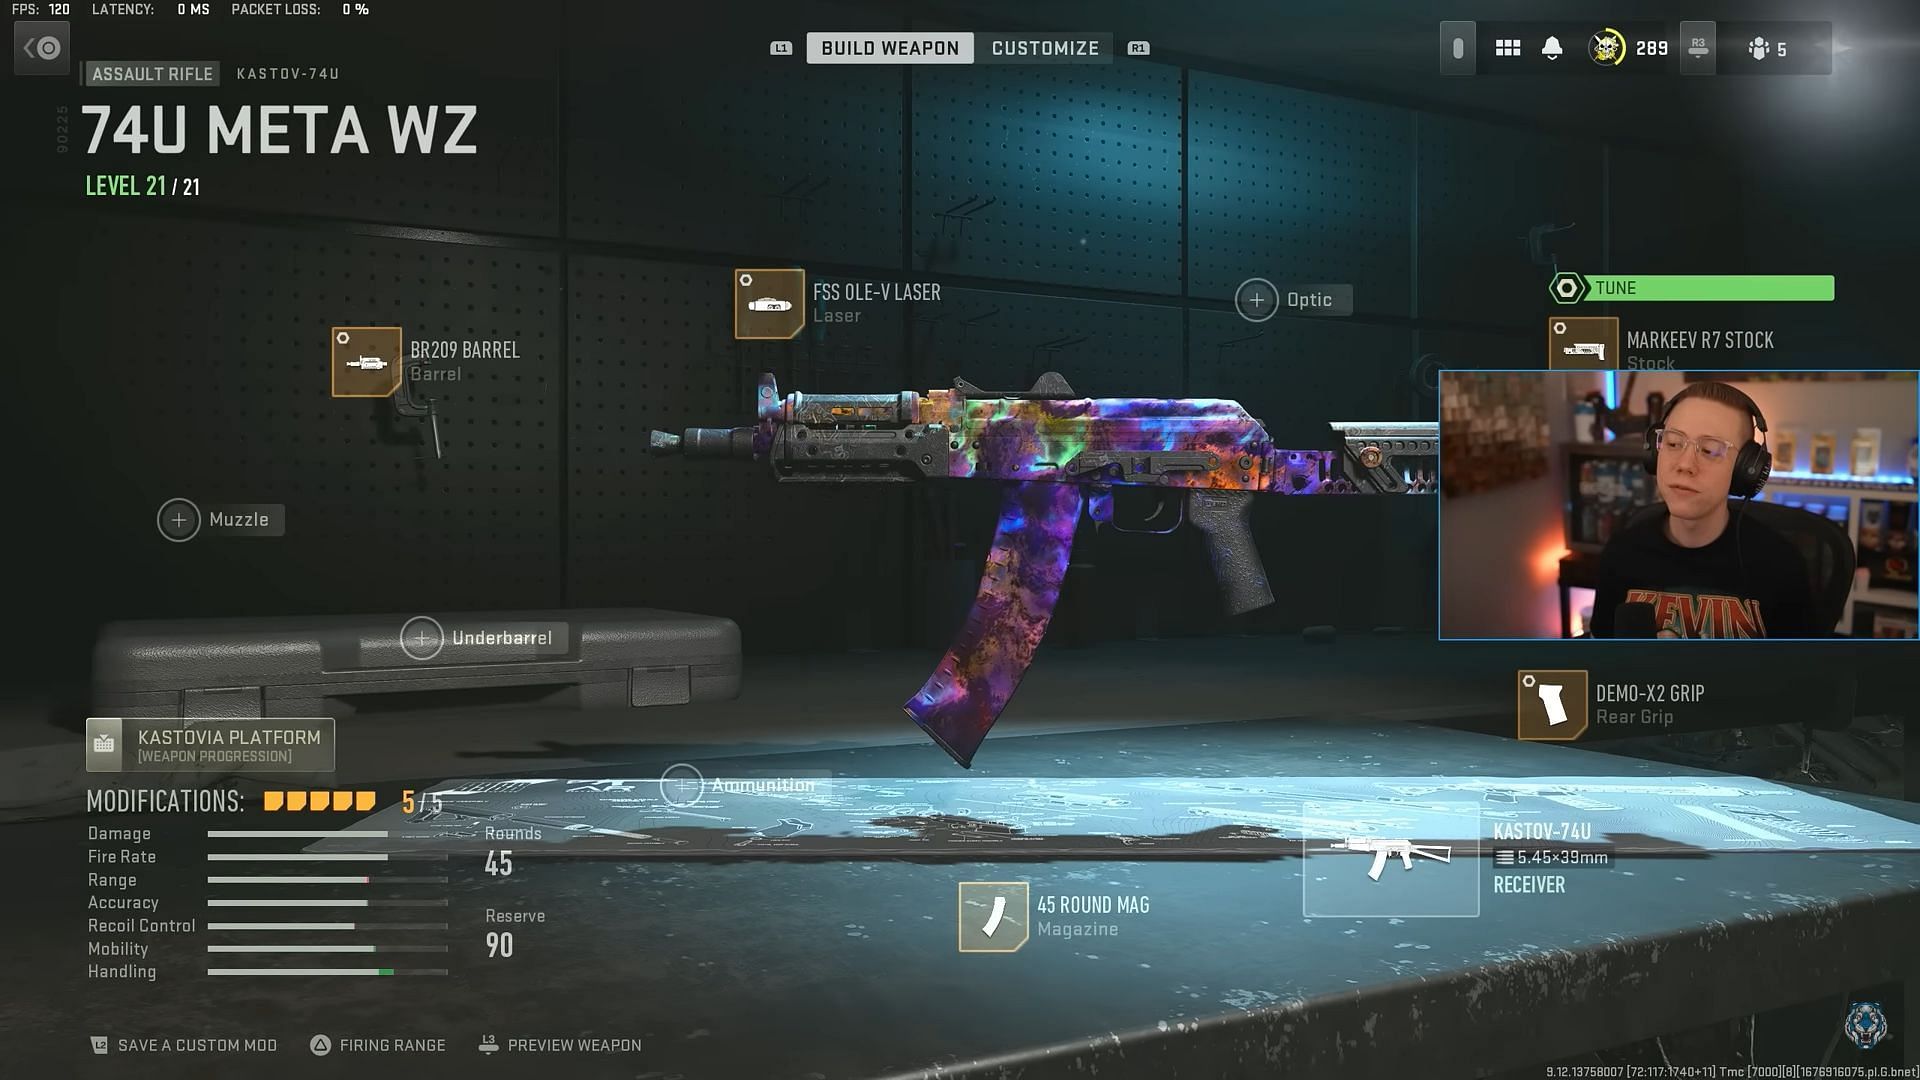 Best loadout for Kastov-74u in Warzone 2 Season 2 (Image via Activision and YouTube/WhosImmortal)